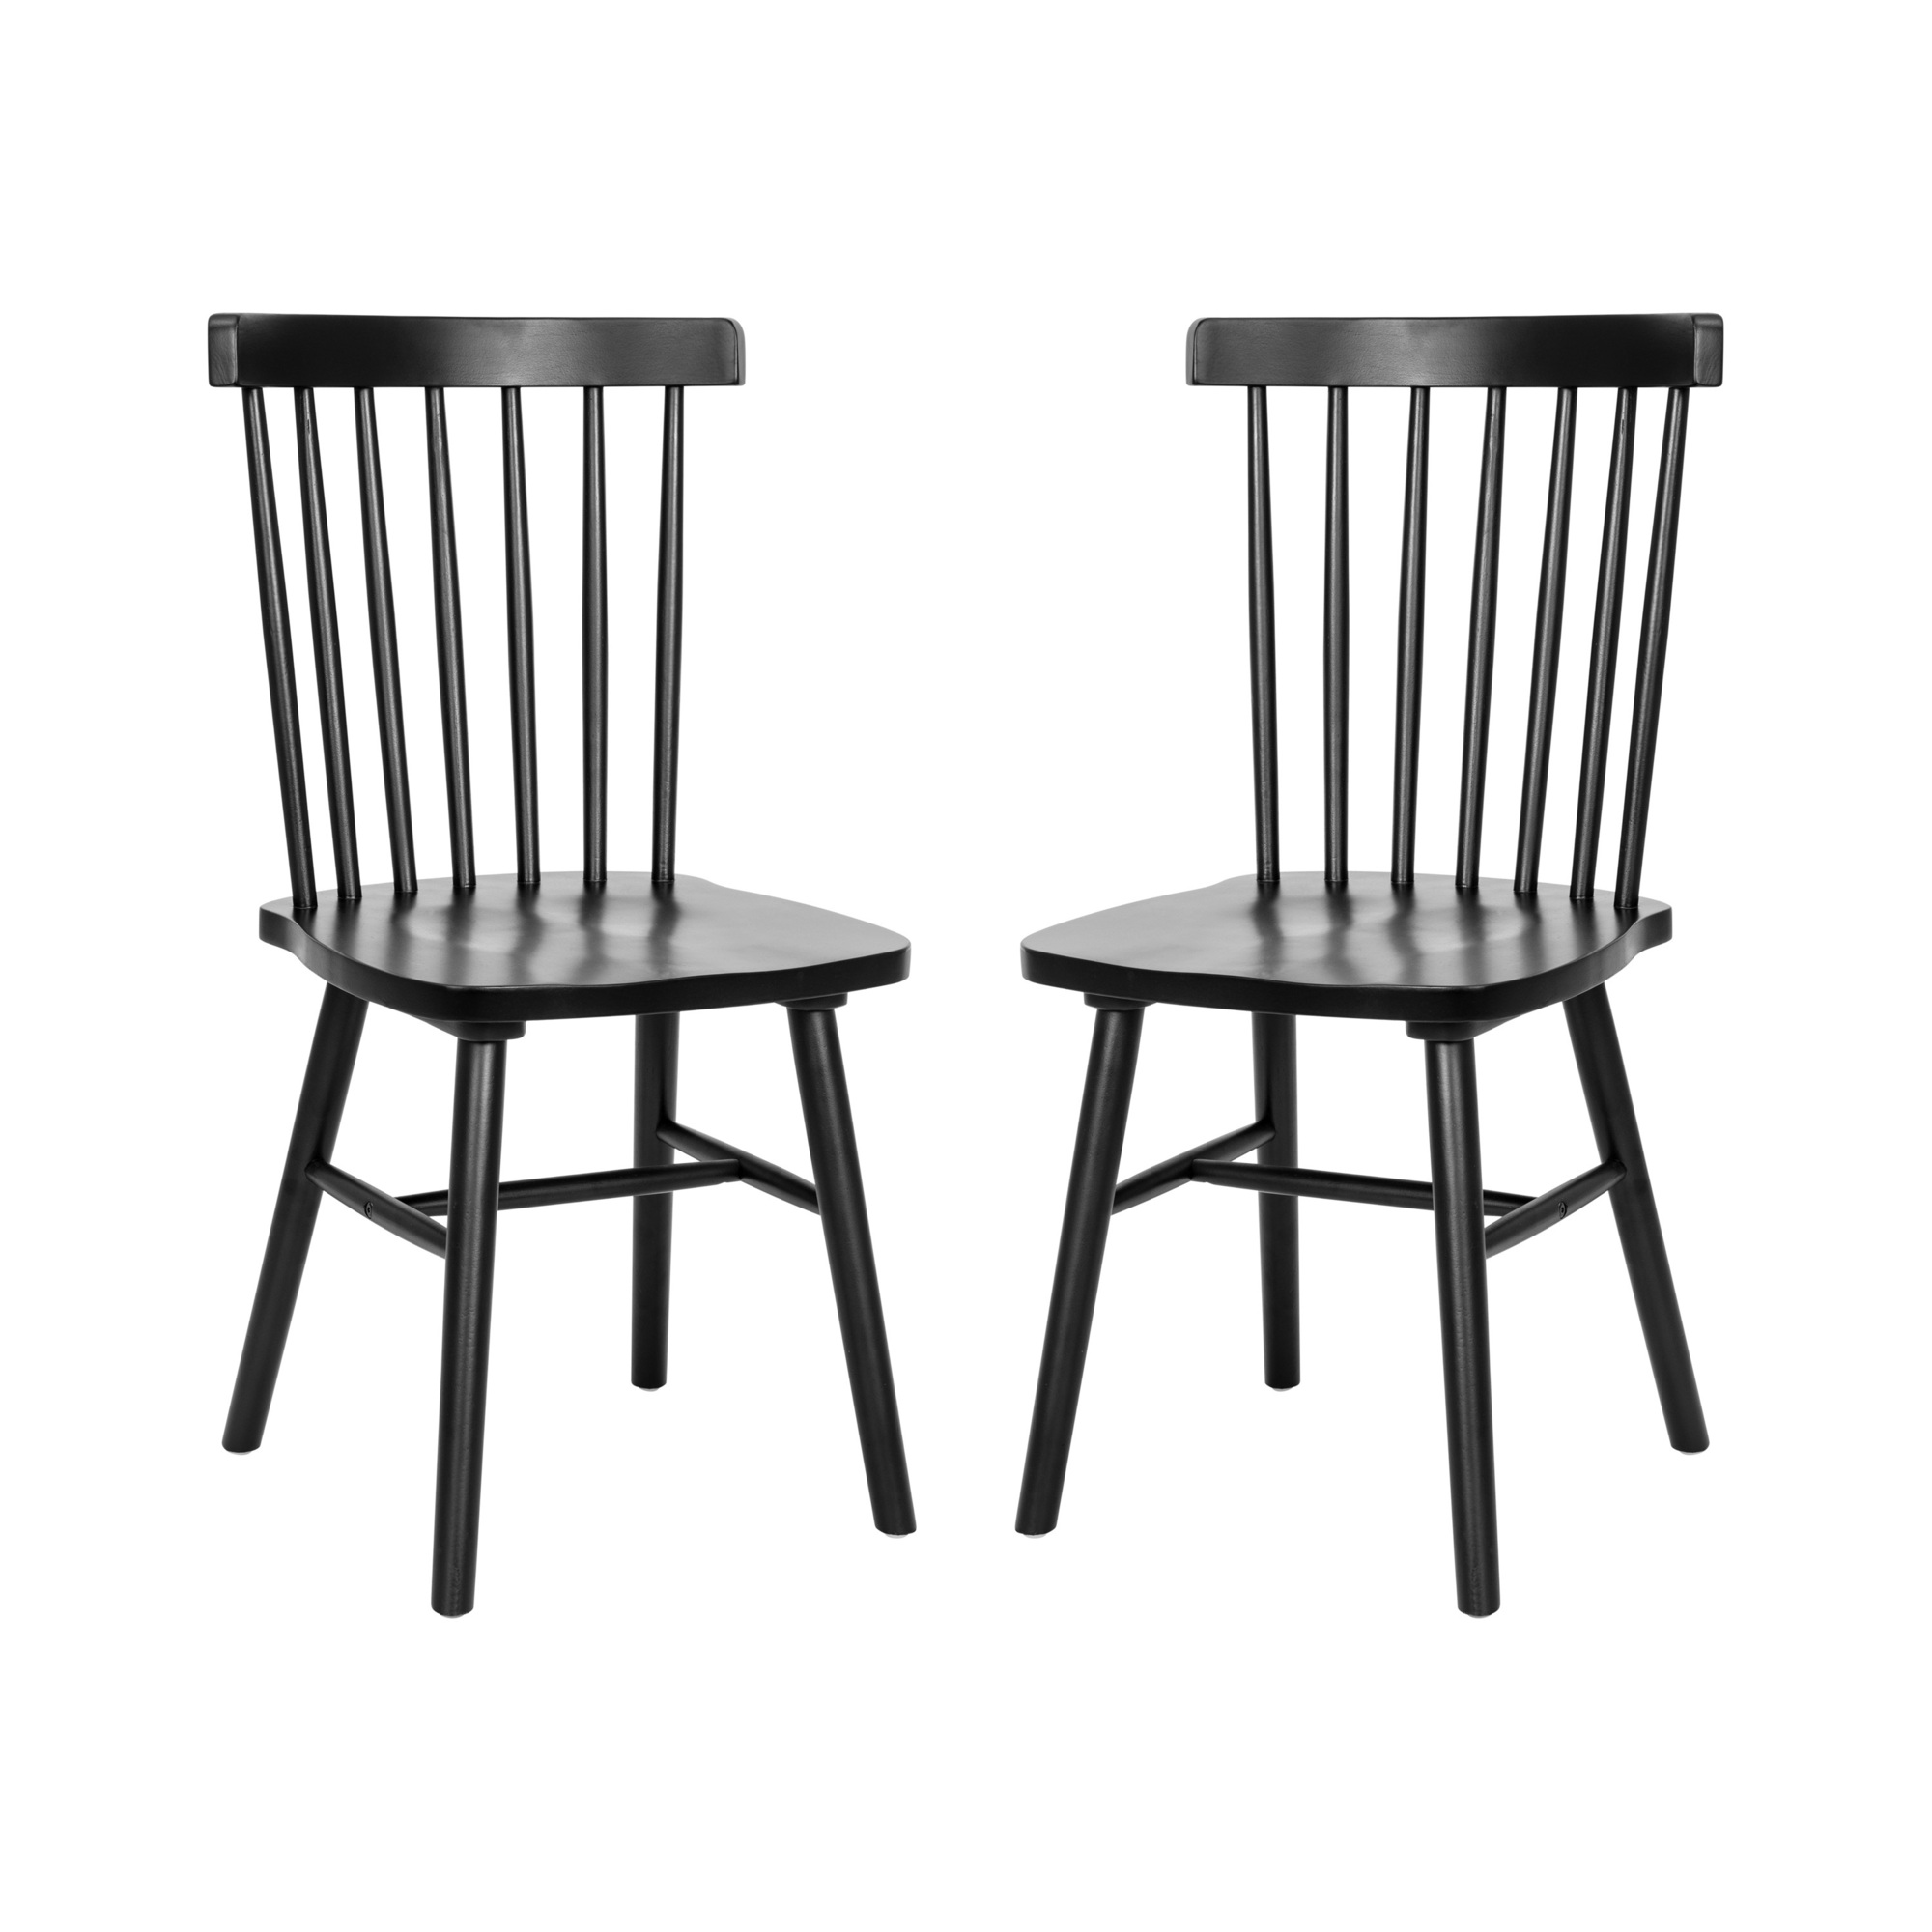 Flash Furniture, 2PK Black Commercial Wooden Spindle Back Chairs, Included (qty.) 1 Model ZH8101WRBK2